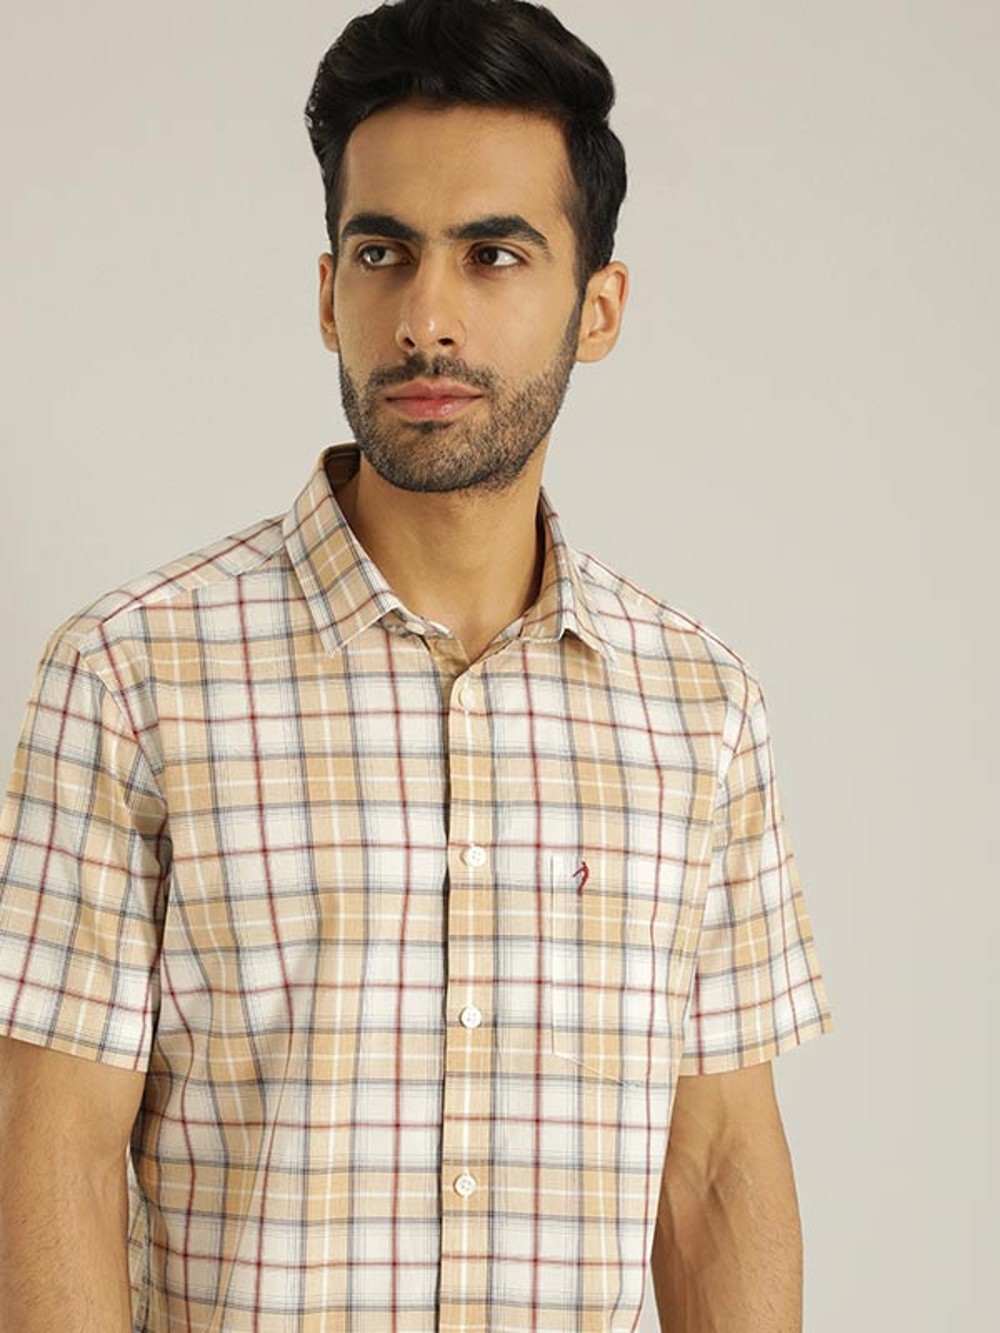 Half Shirts - Buy Half Sleeve Shirts For Men Online at Best Prices In India